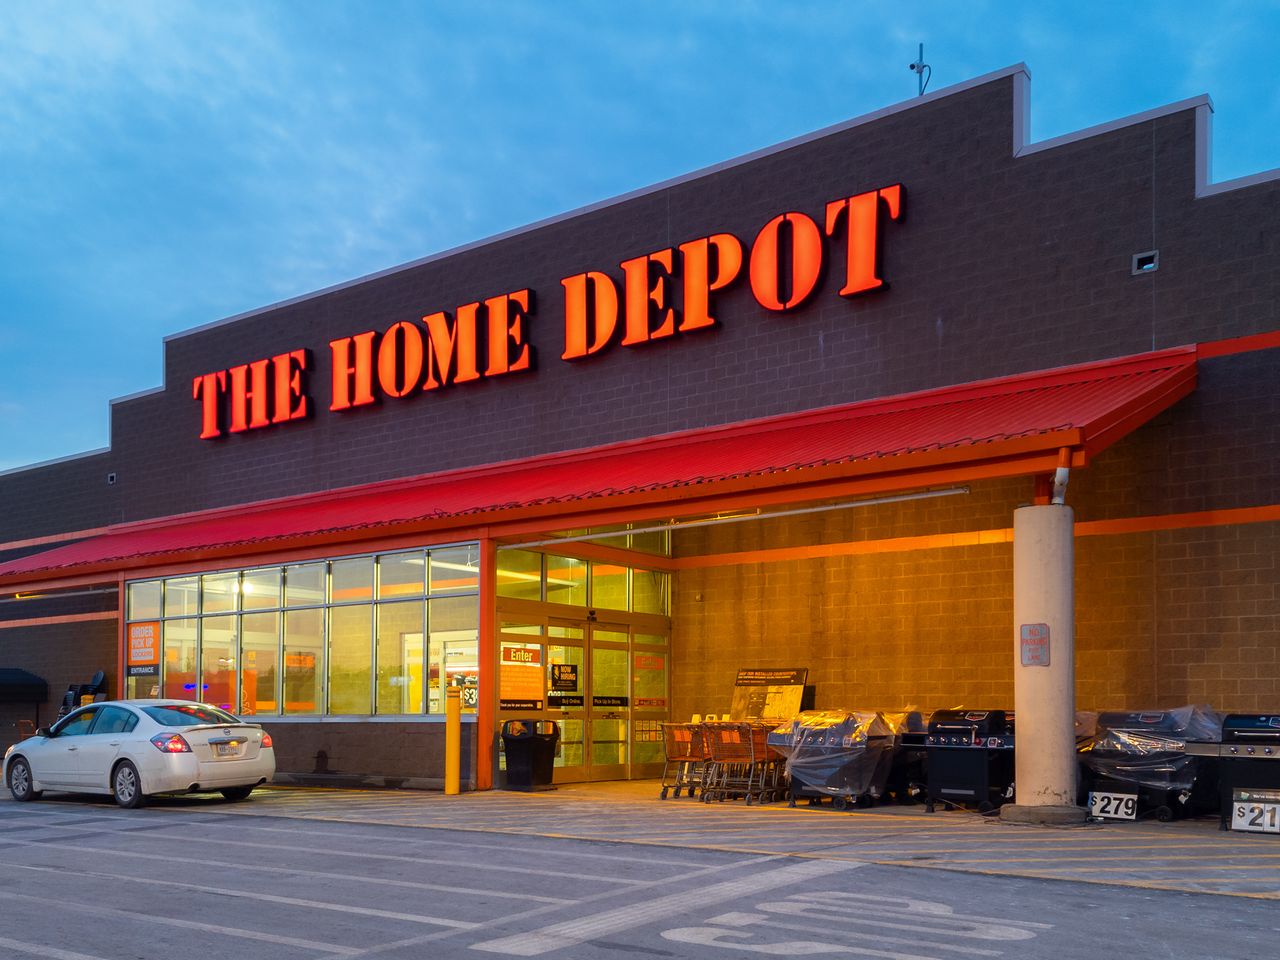 Should I purchase a home safe at a specialty store or big box retailer?